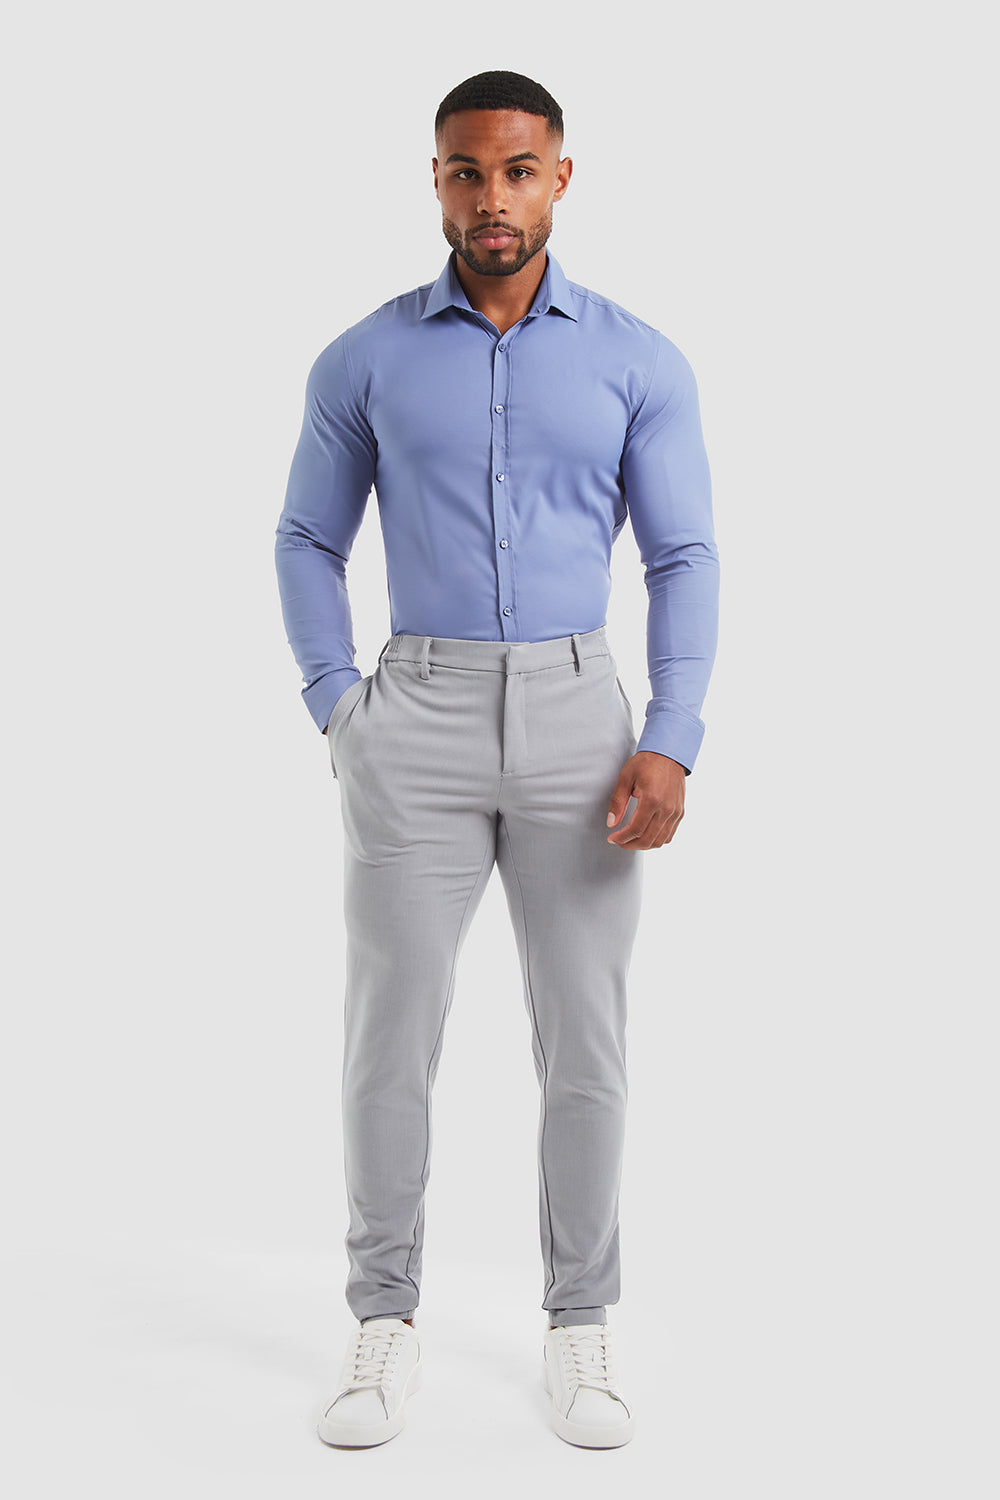 Performance Dress Shirt in Mid Blue - TAILORED ATHLETE - ROW